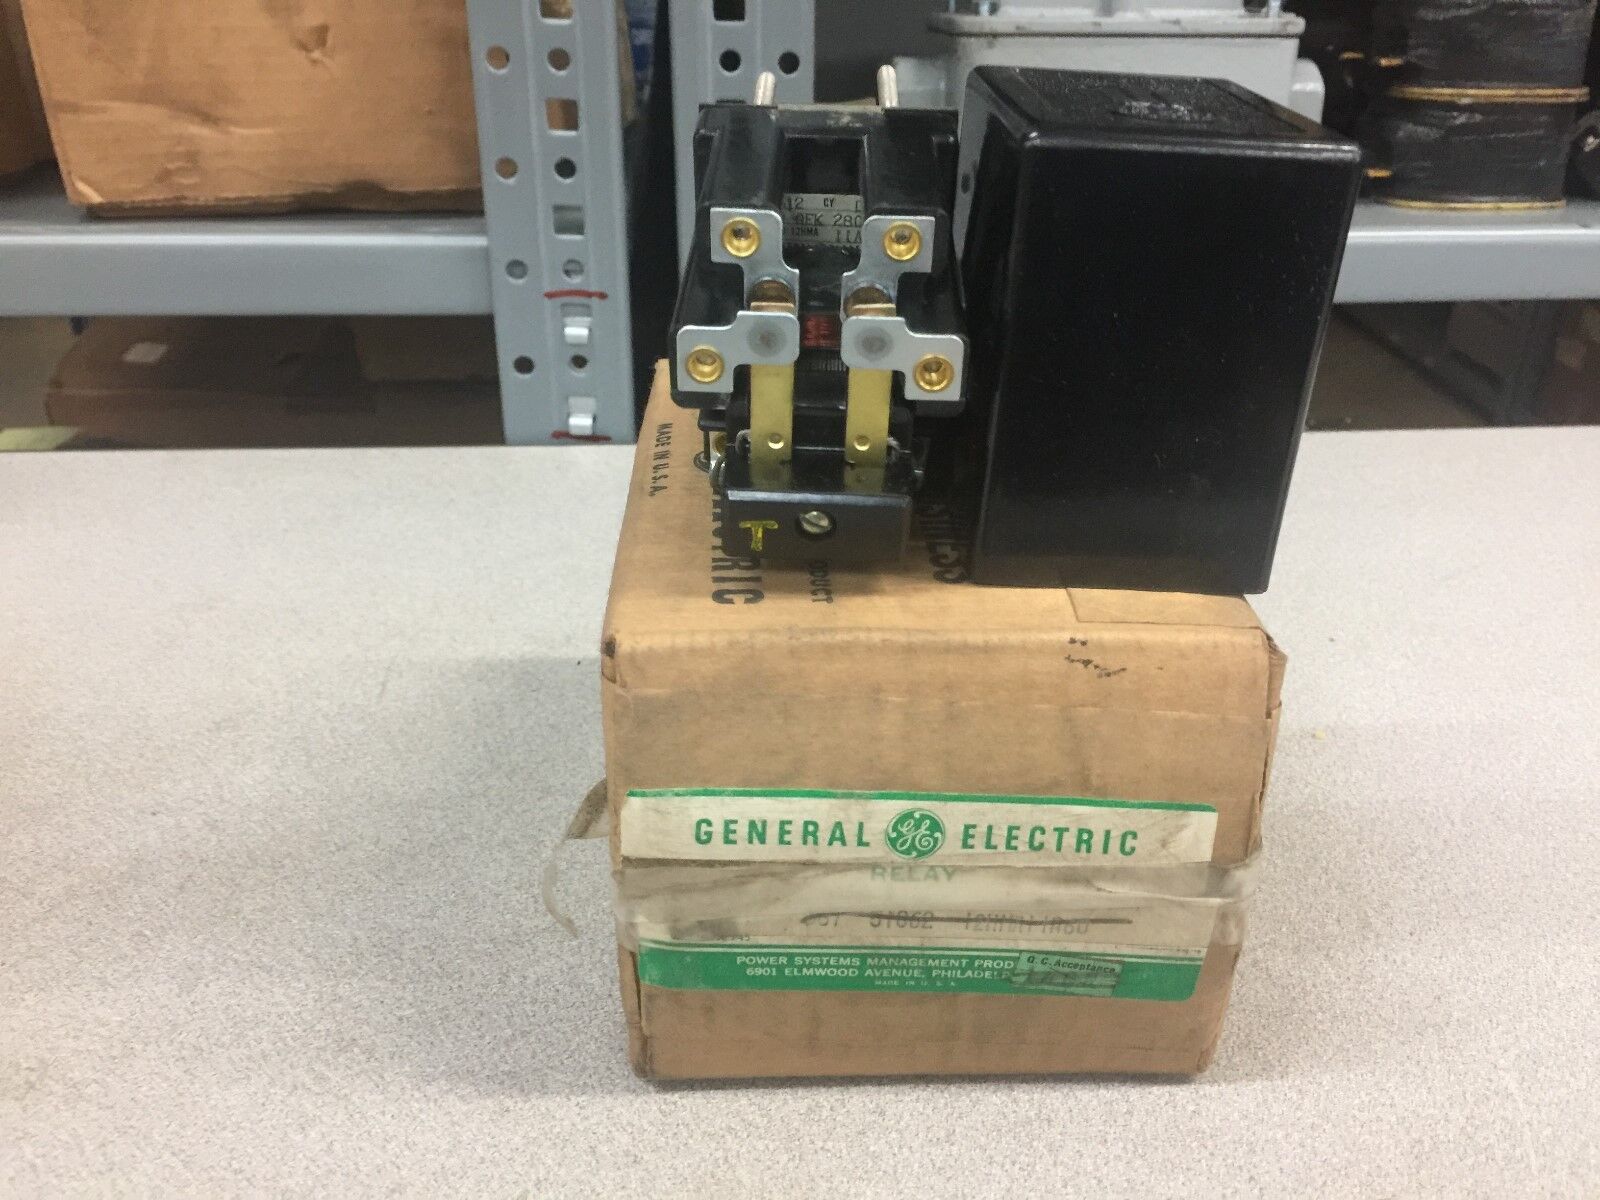 NEW IN BOX GE RELAY 12HMA 11A22